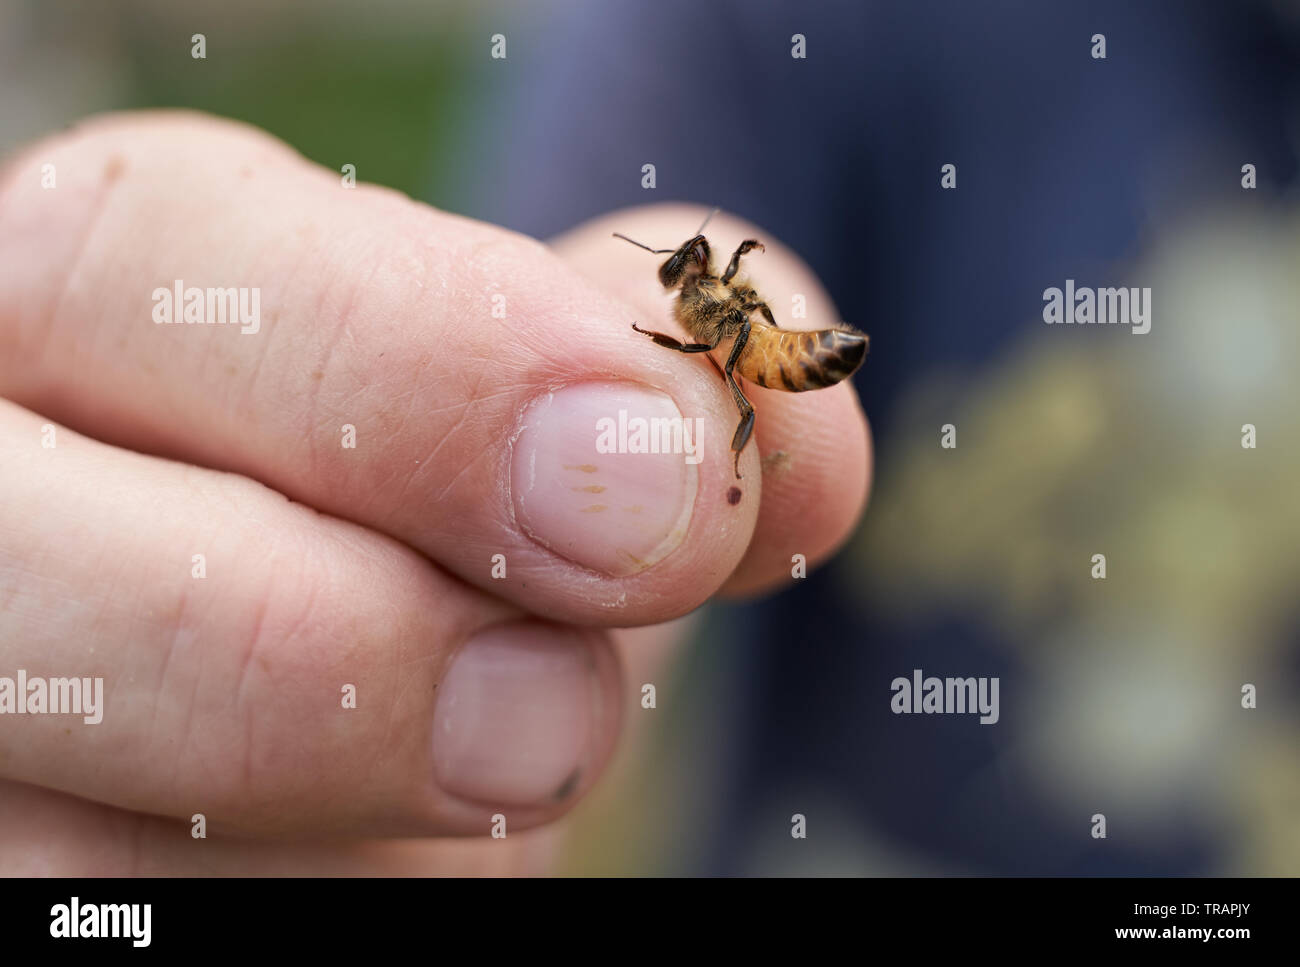 A beekeeper holds up an individual worker bee (honey bee) during an inspection of a hive. Urban beeking has become much more popular in recent years. Stock Photo